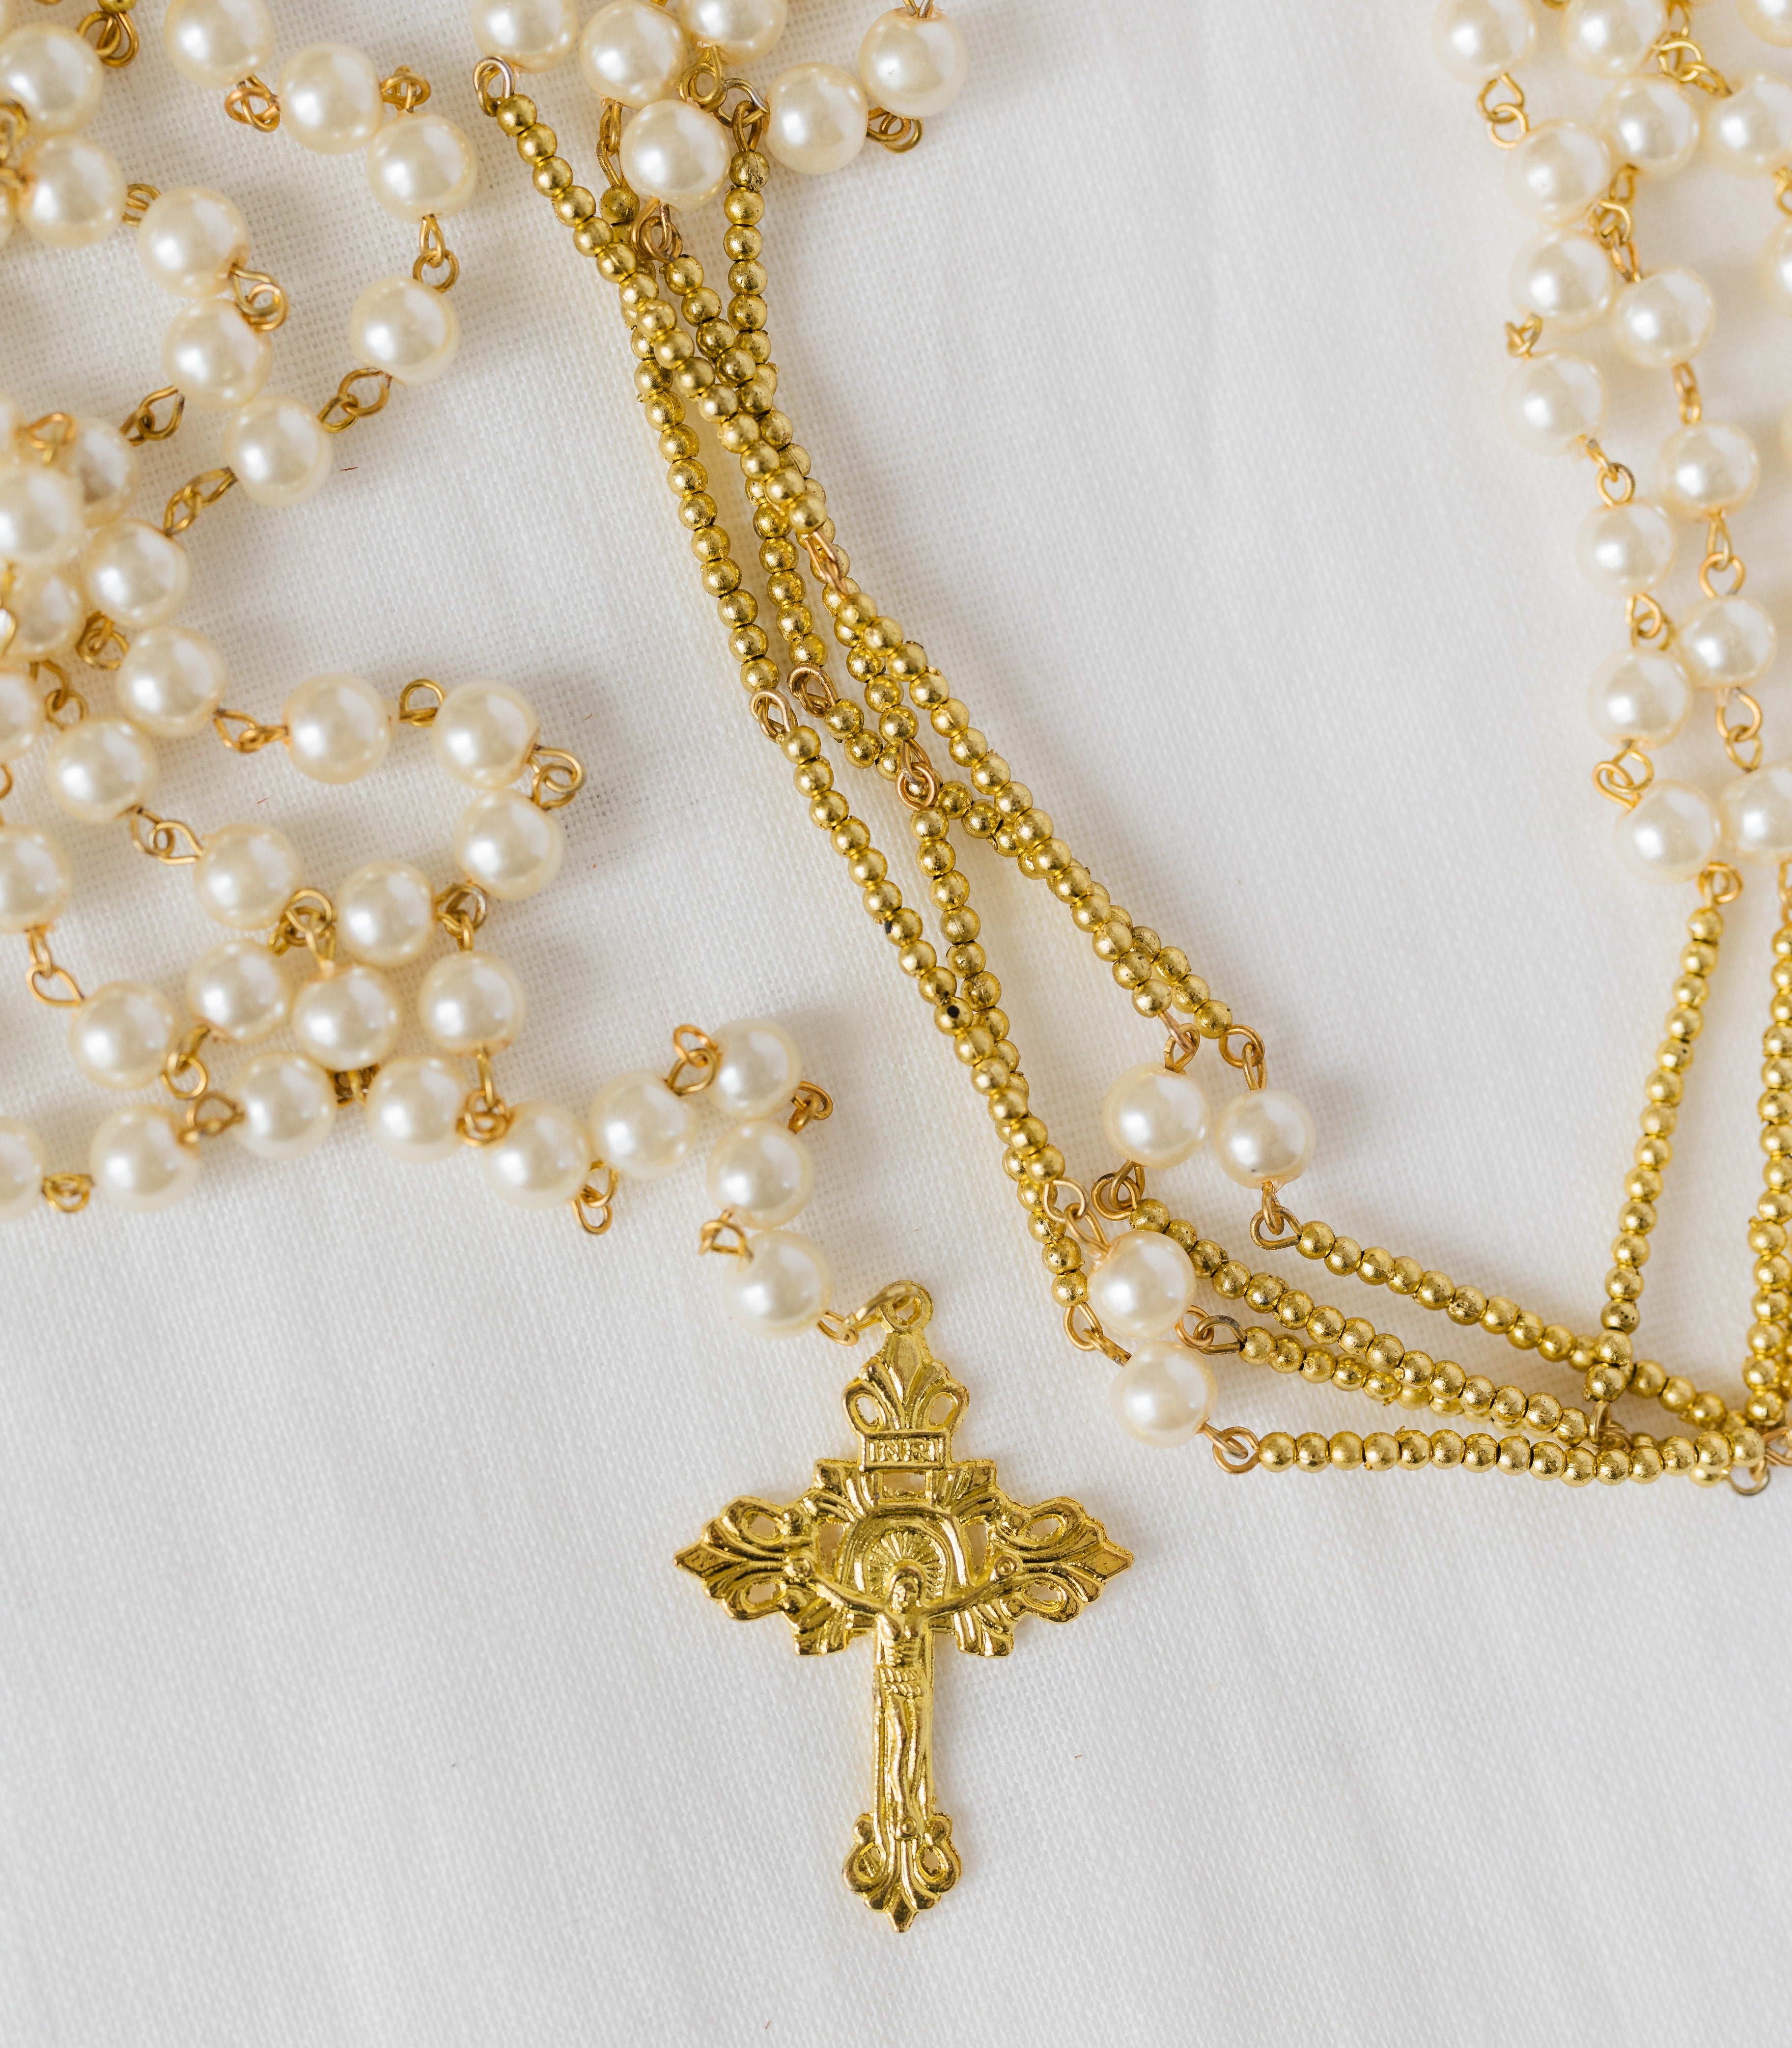 Glossy Pearl Rosary Wedding Unity Cord - Wedding Library - Gold